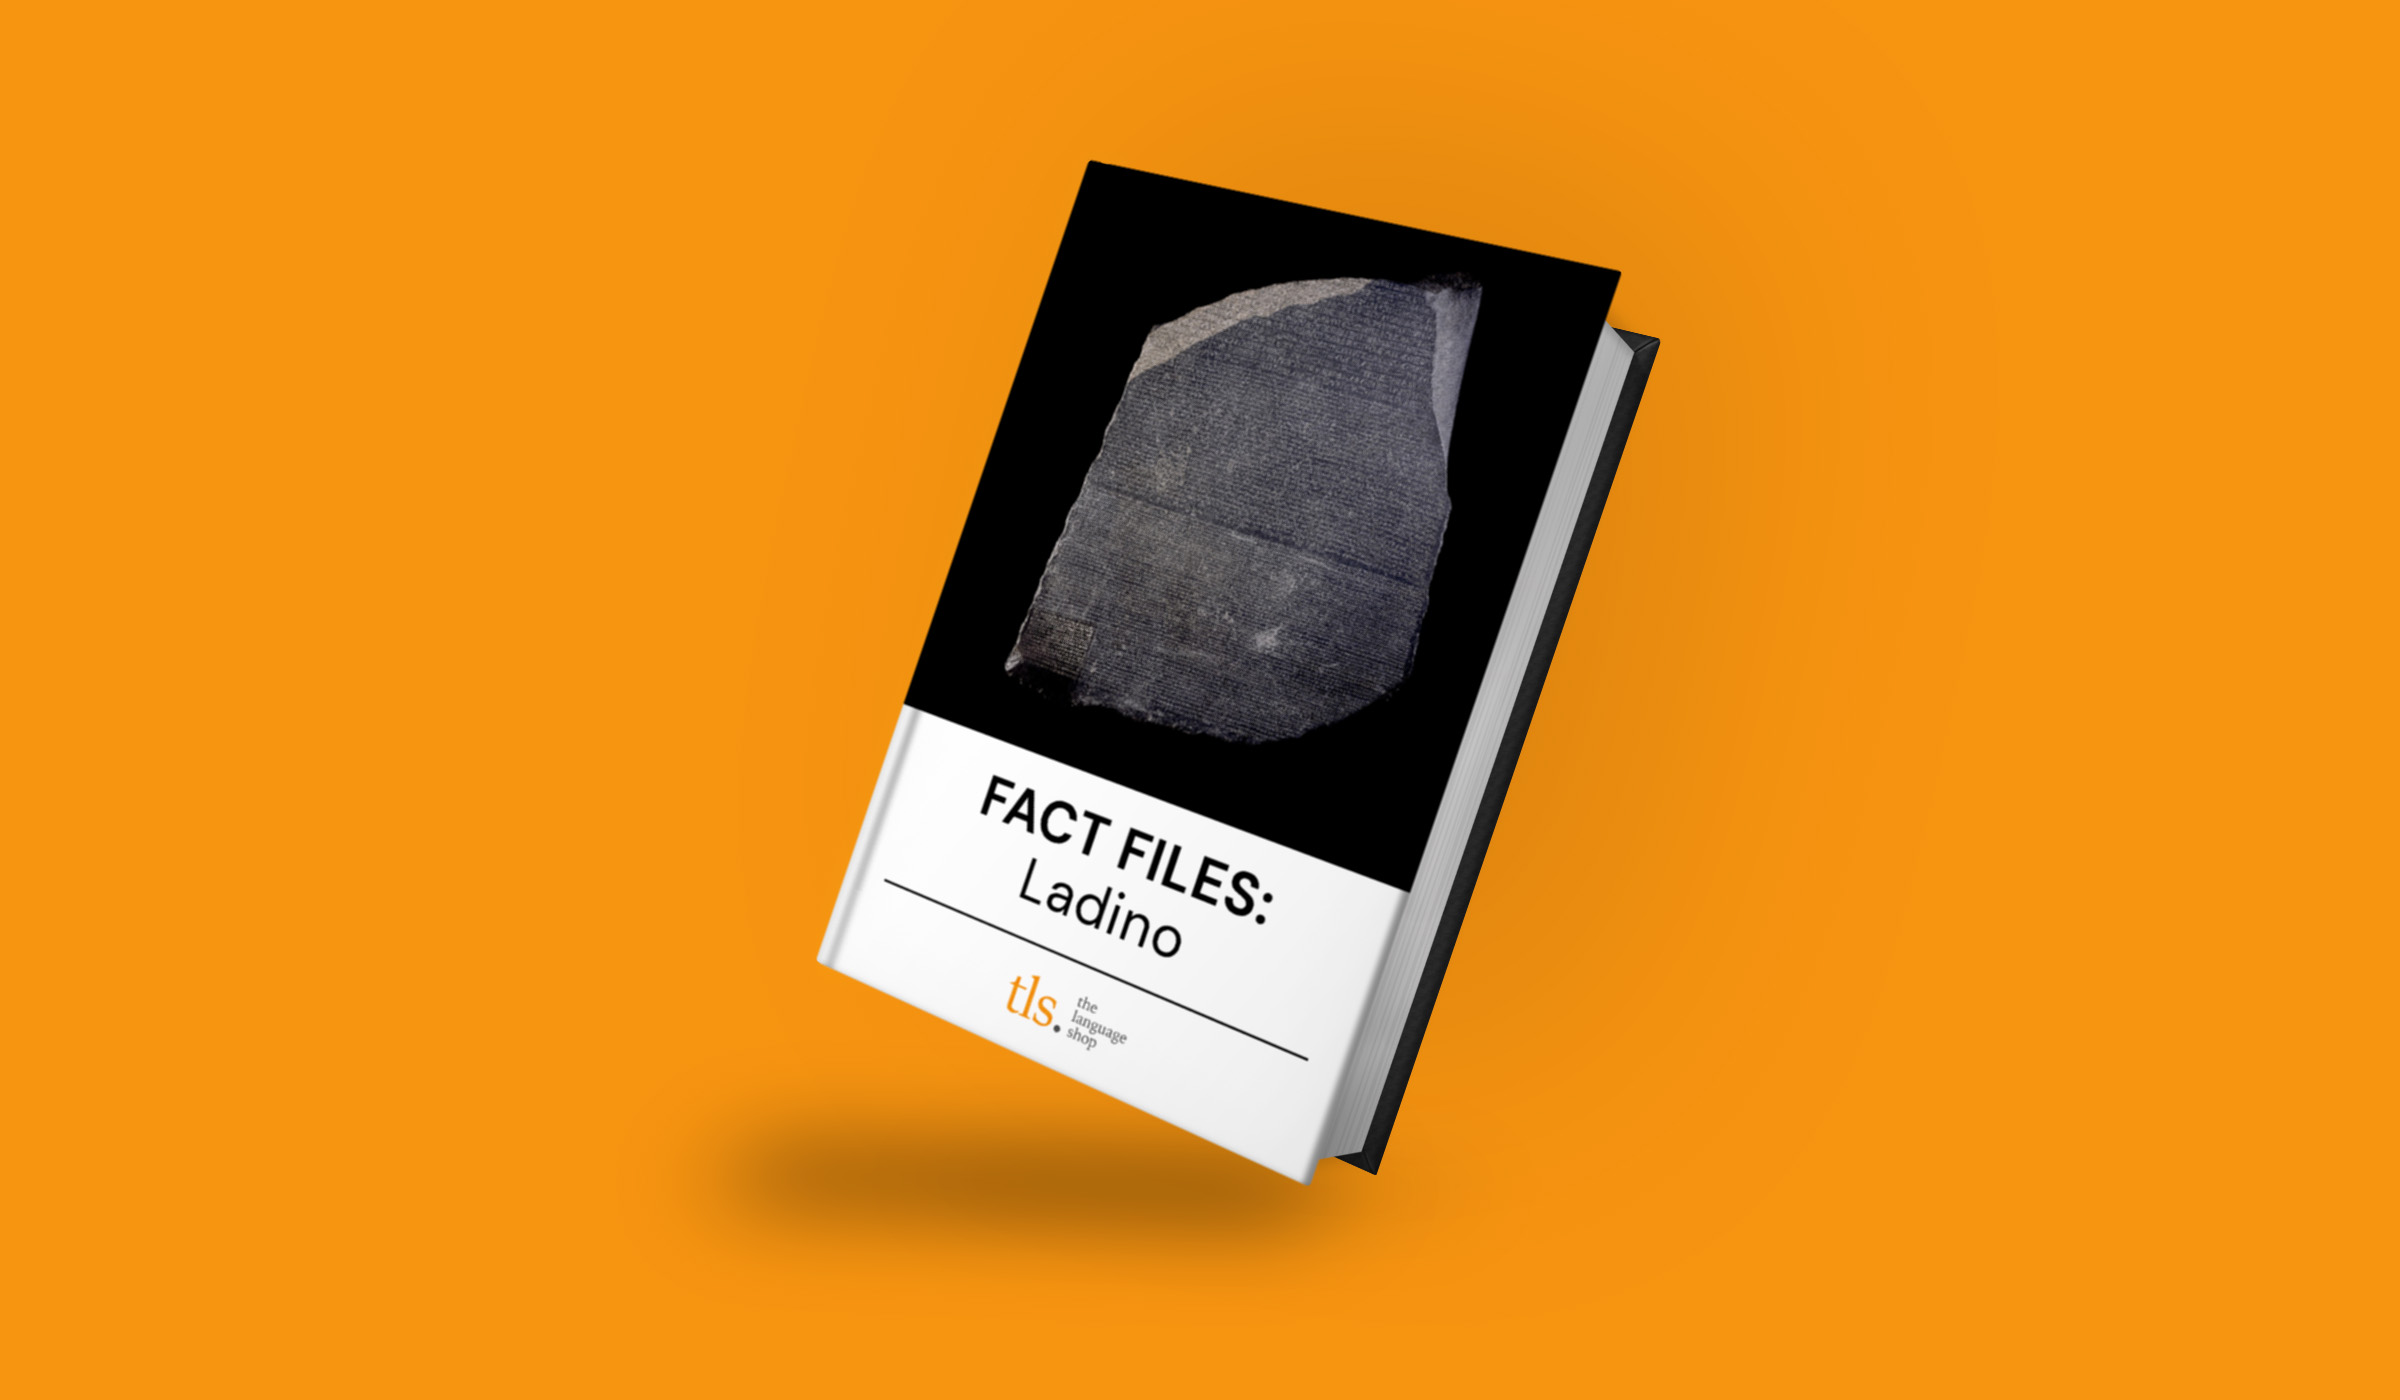 Book with rosetta stone on the front cover and the title 'Fact files: Ladino' against orange background